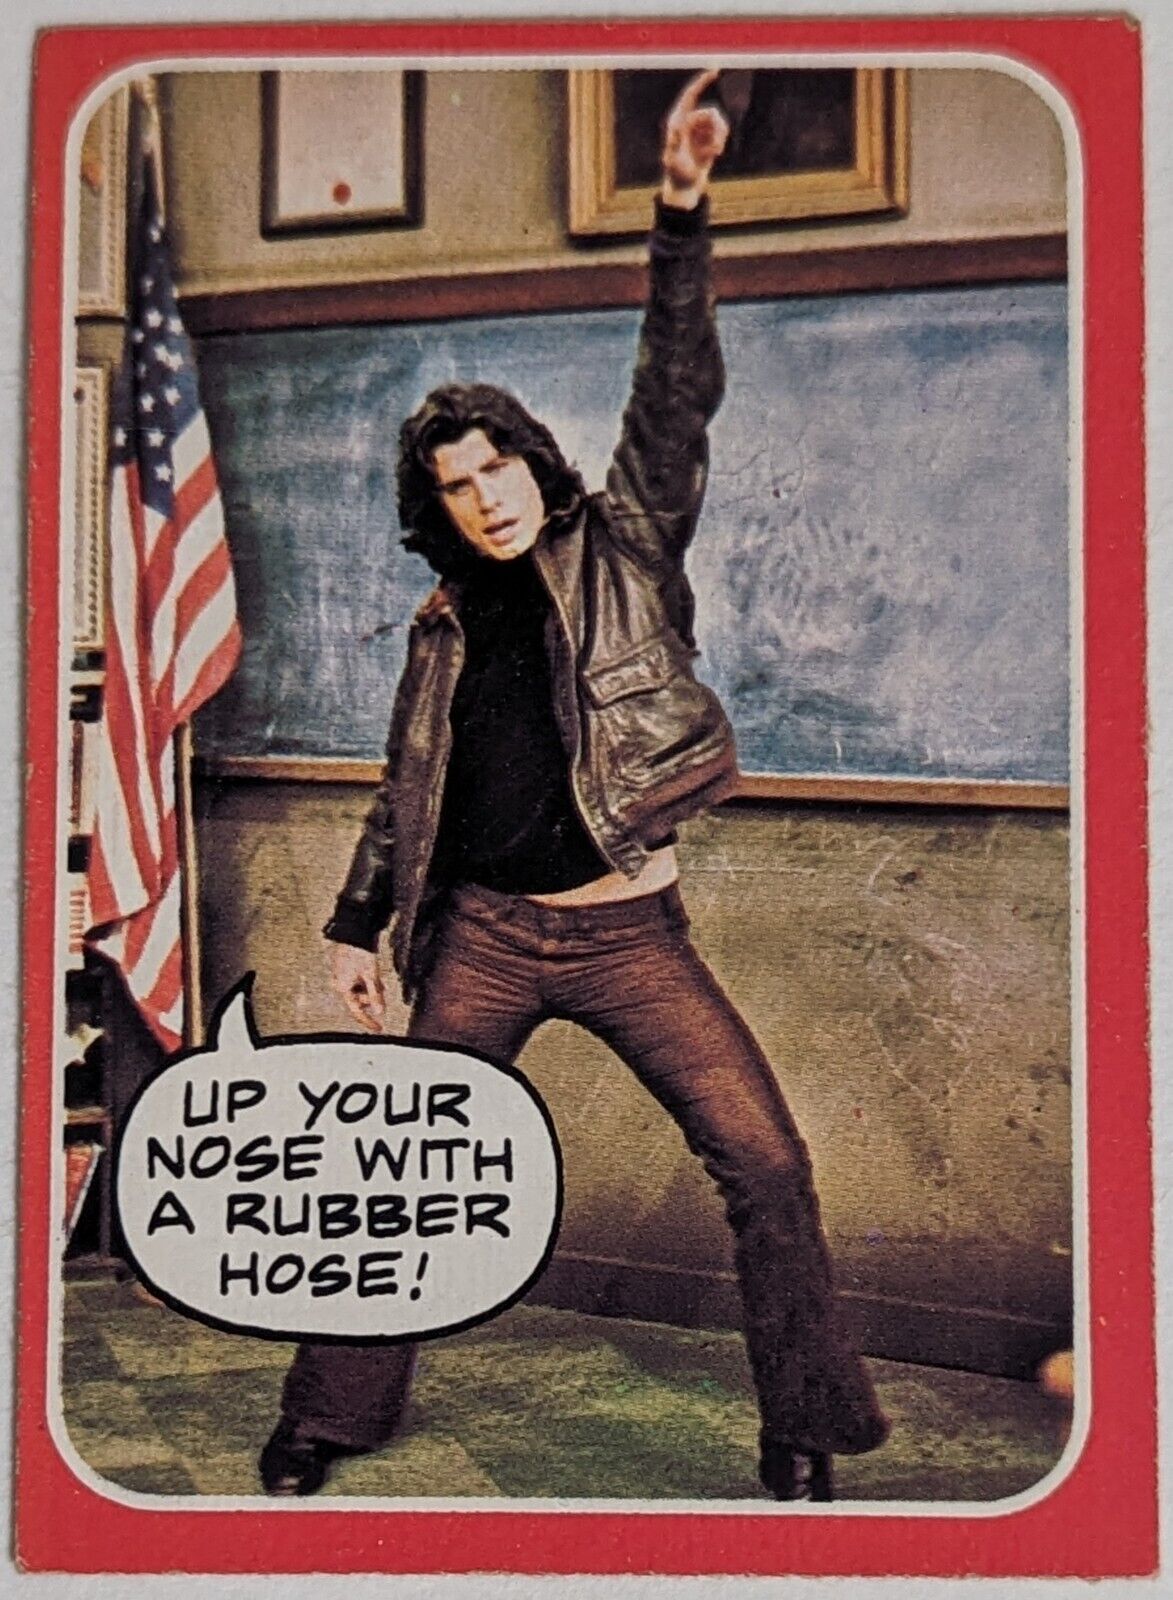 1976 Topps Welcome Back Kotter Complete Set Of 53 Trading Cards